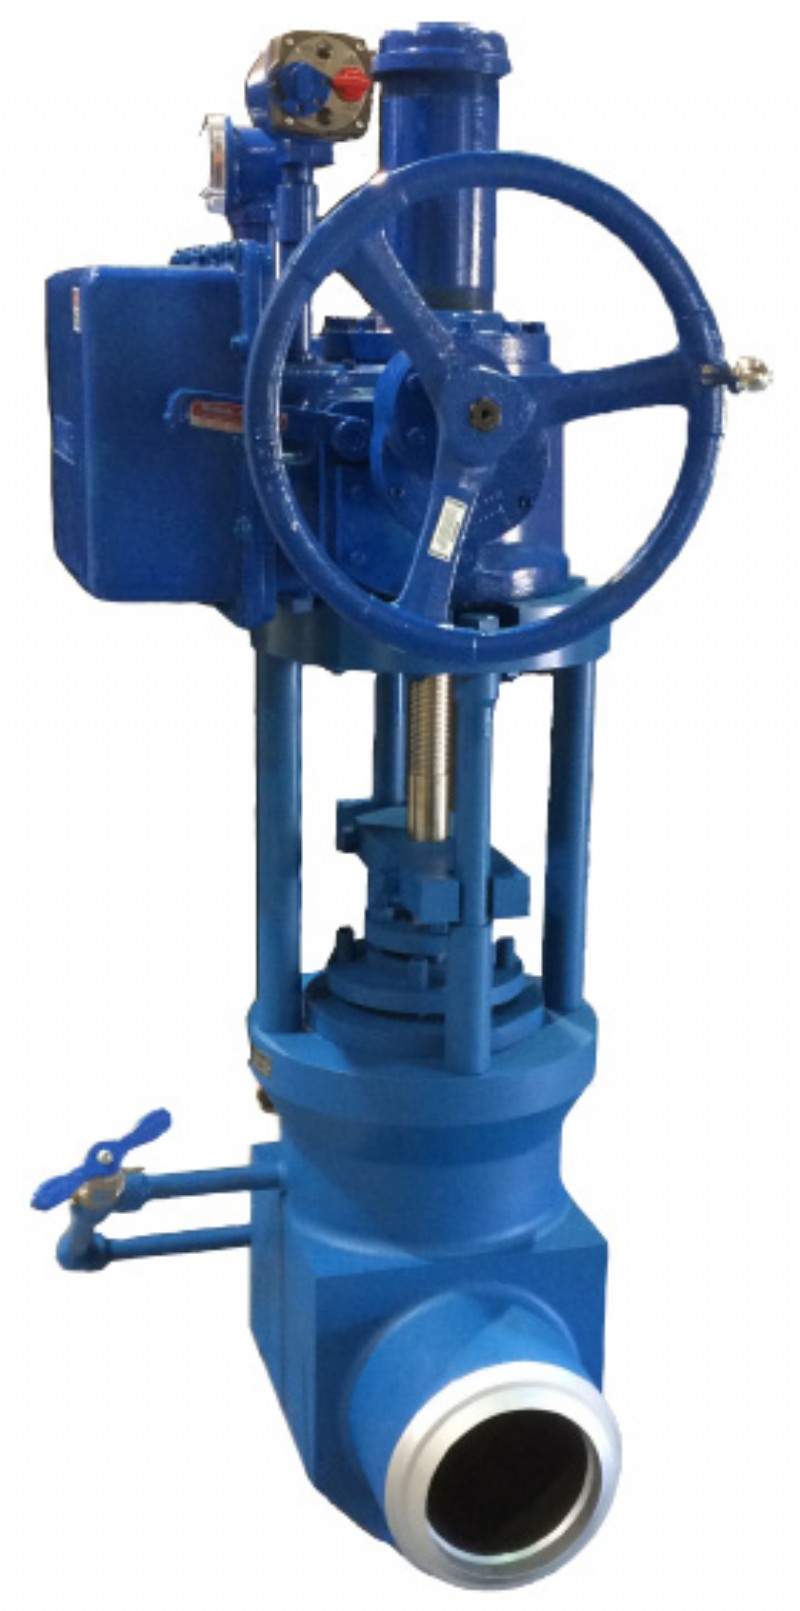 Atwood & Morrill Forged Gate Valve